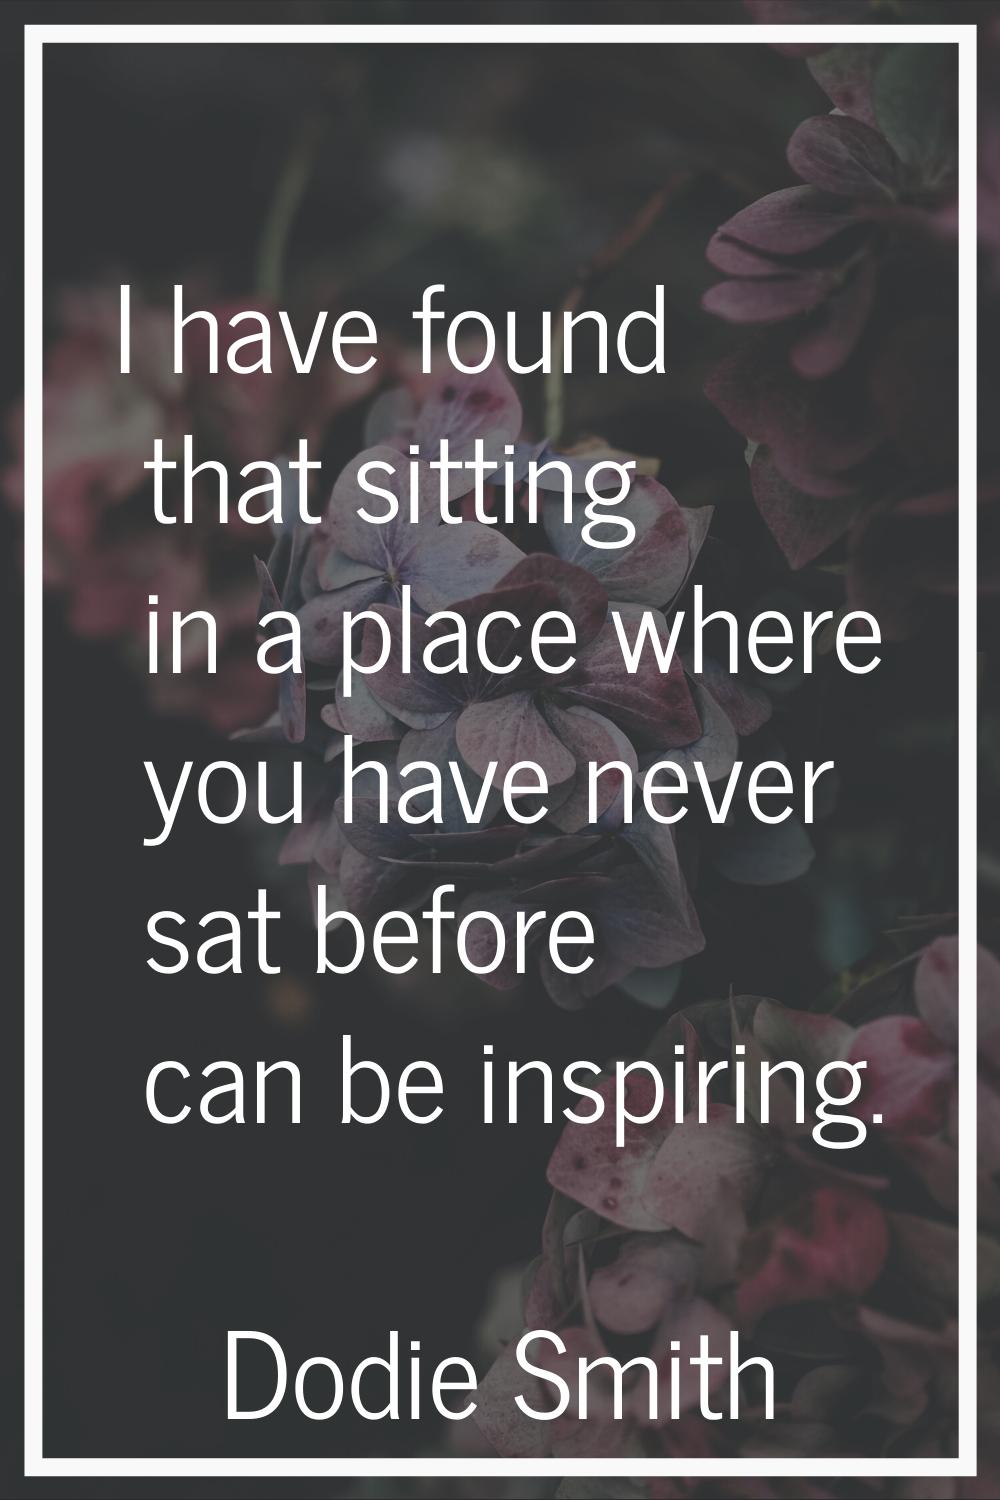 I have found that sitting in a place where you have never sat before can be inspiring.